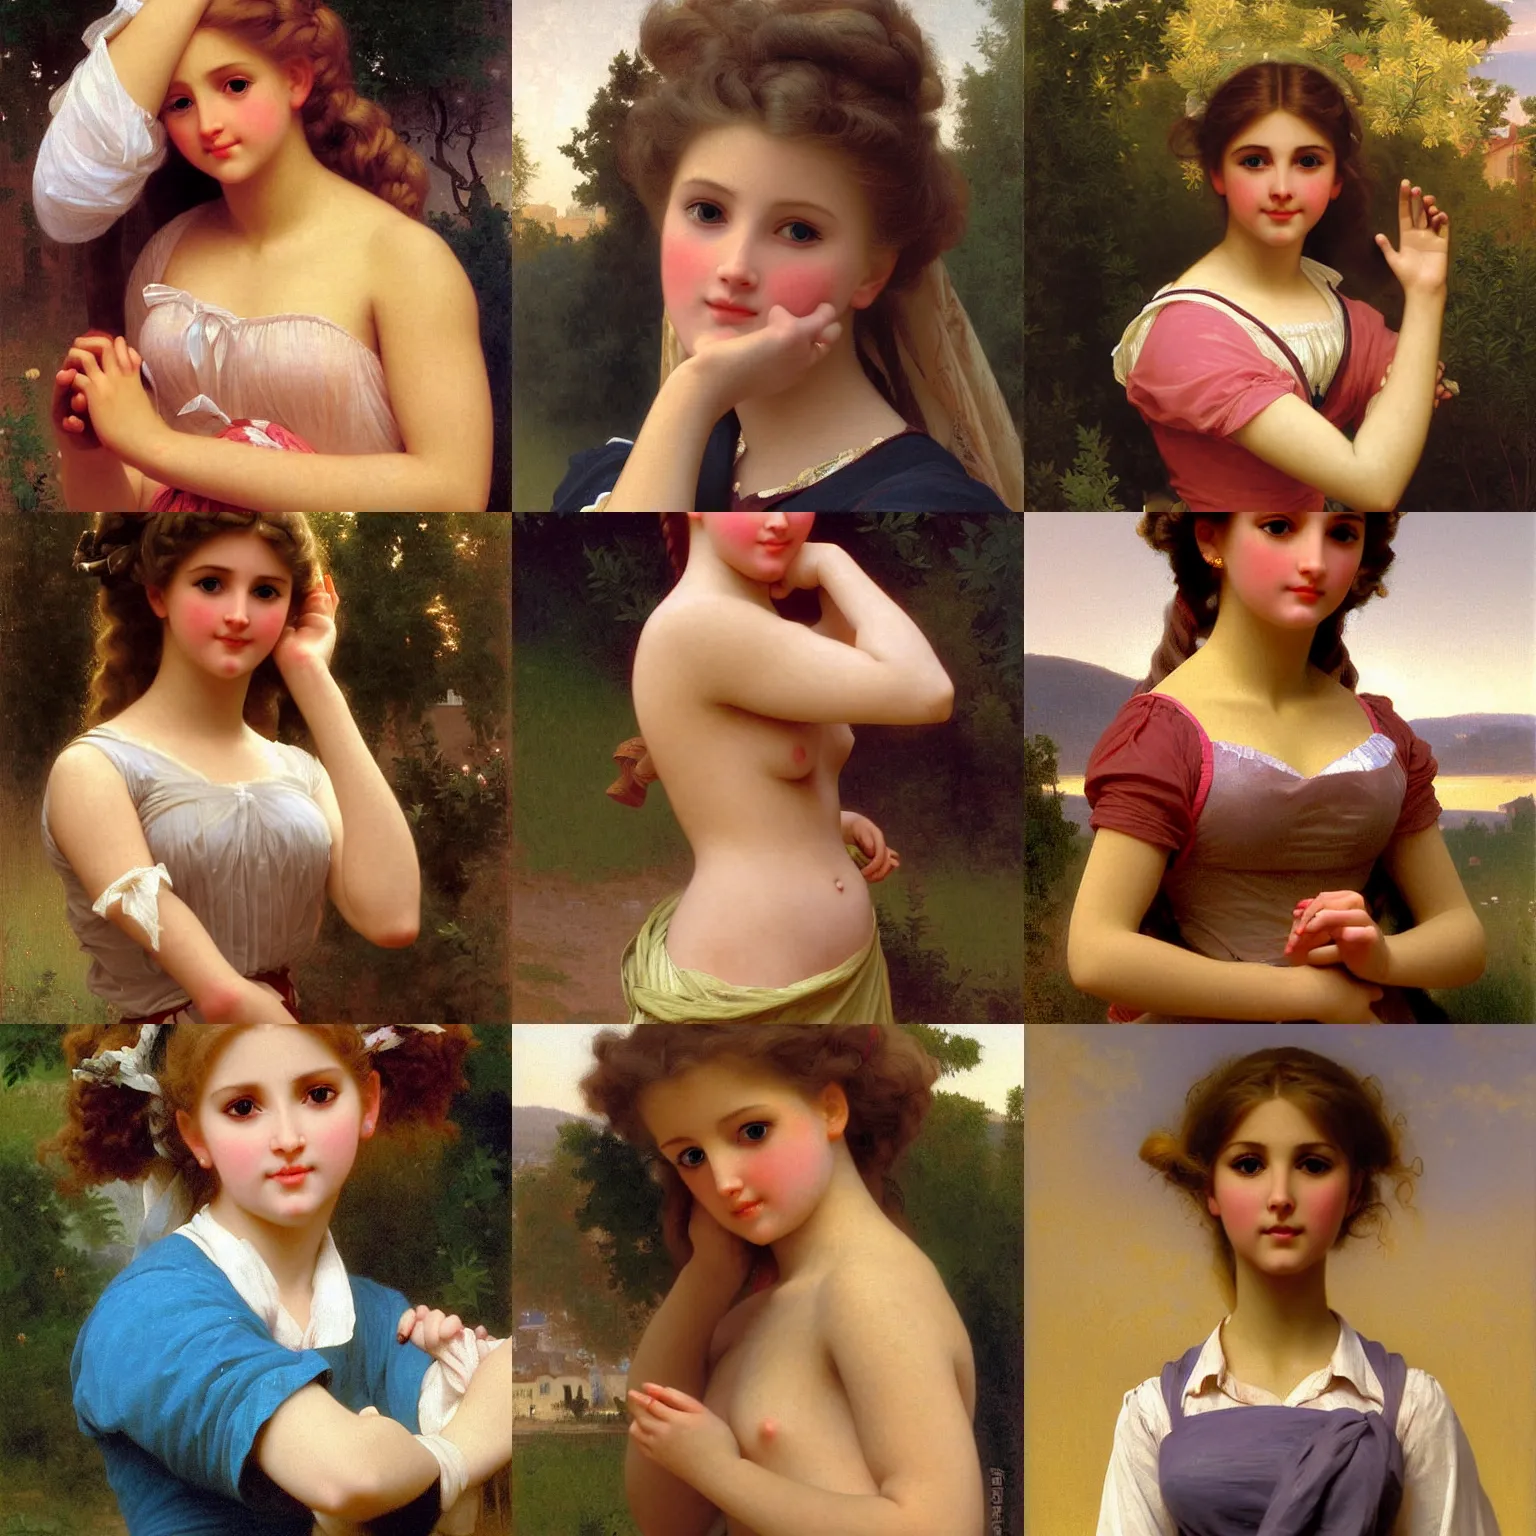 Prompt: Painting of Barbie doll, surprised expression on her face, her hand is on her waist, her other hand is on her face. Art by william adolphe bouguereau. During golden hour. Extremely detailed. Beautiful. 4K. Award winning.